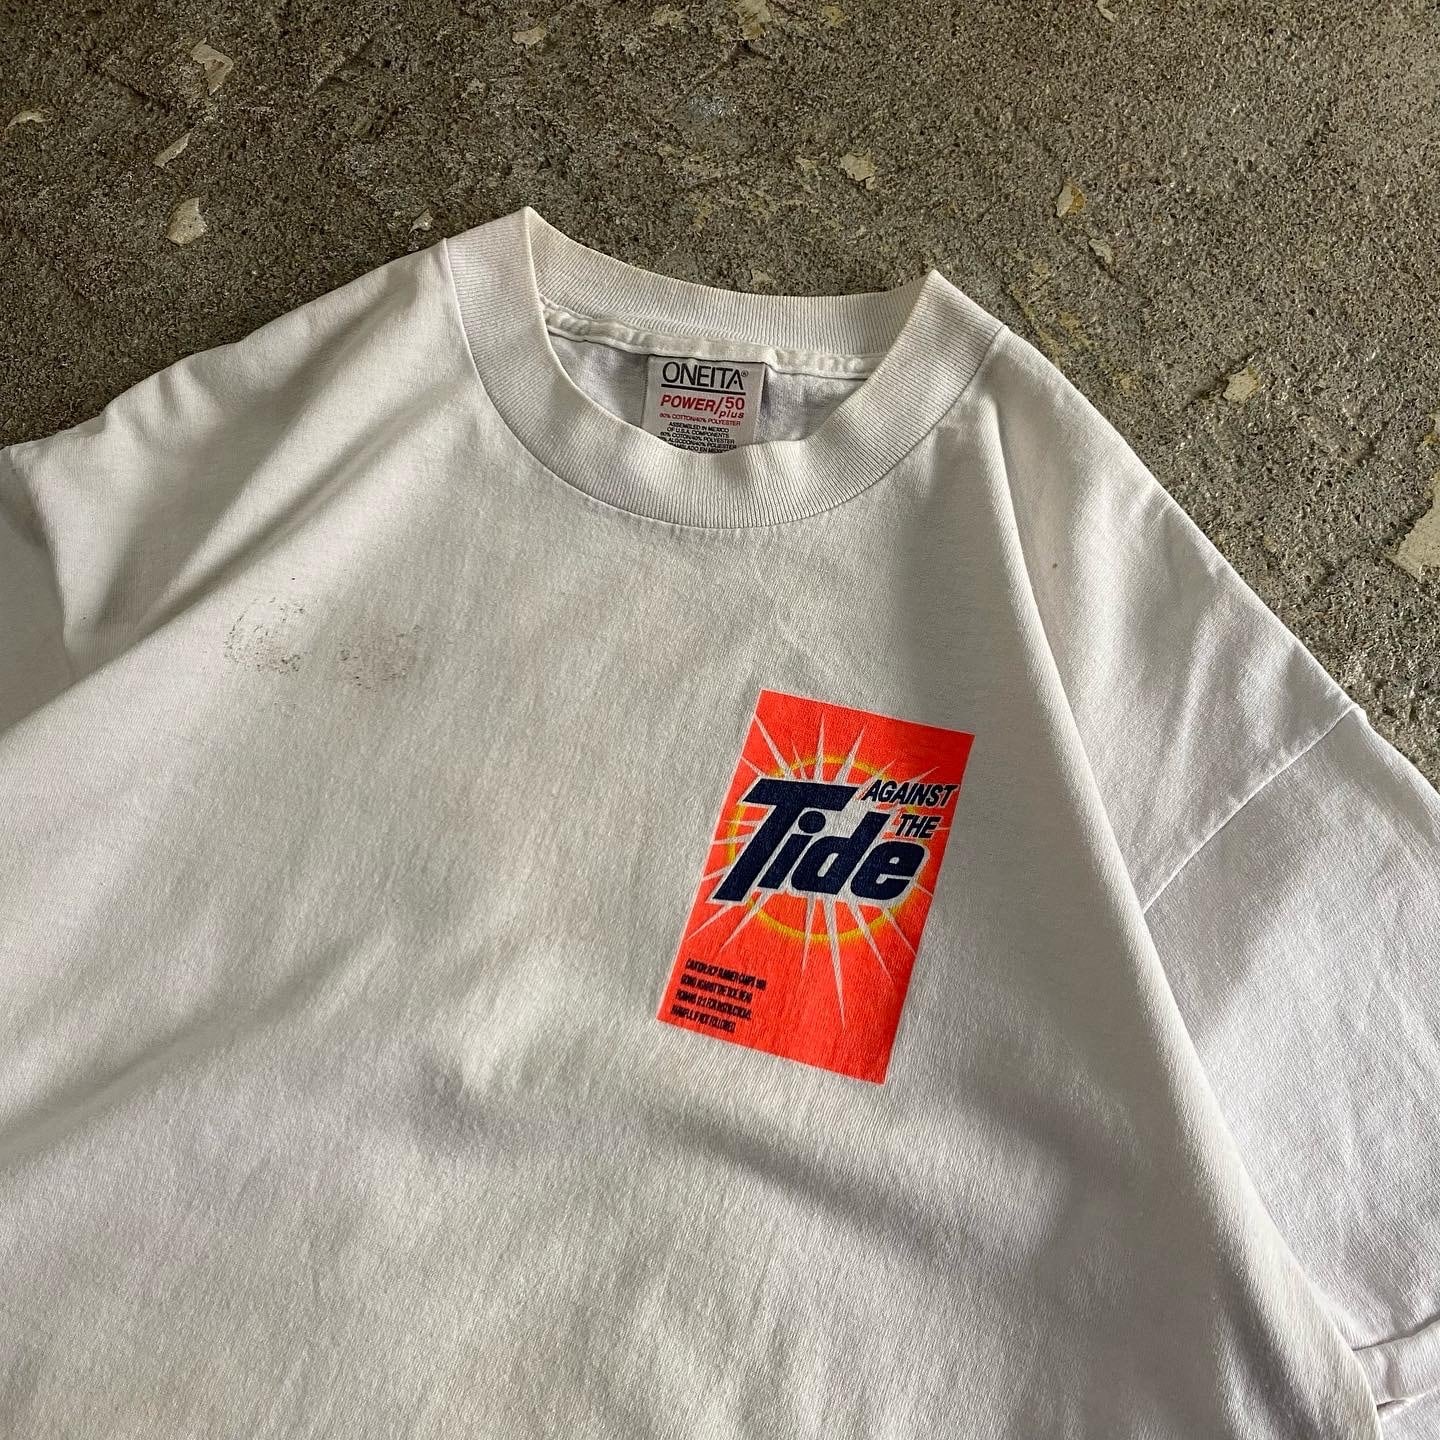 90s TIDE T-shirt | What'z up